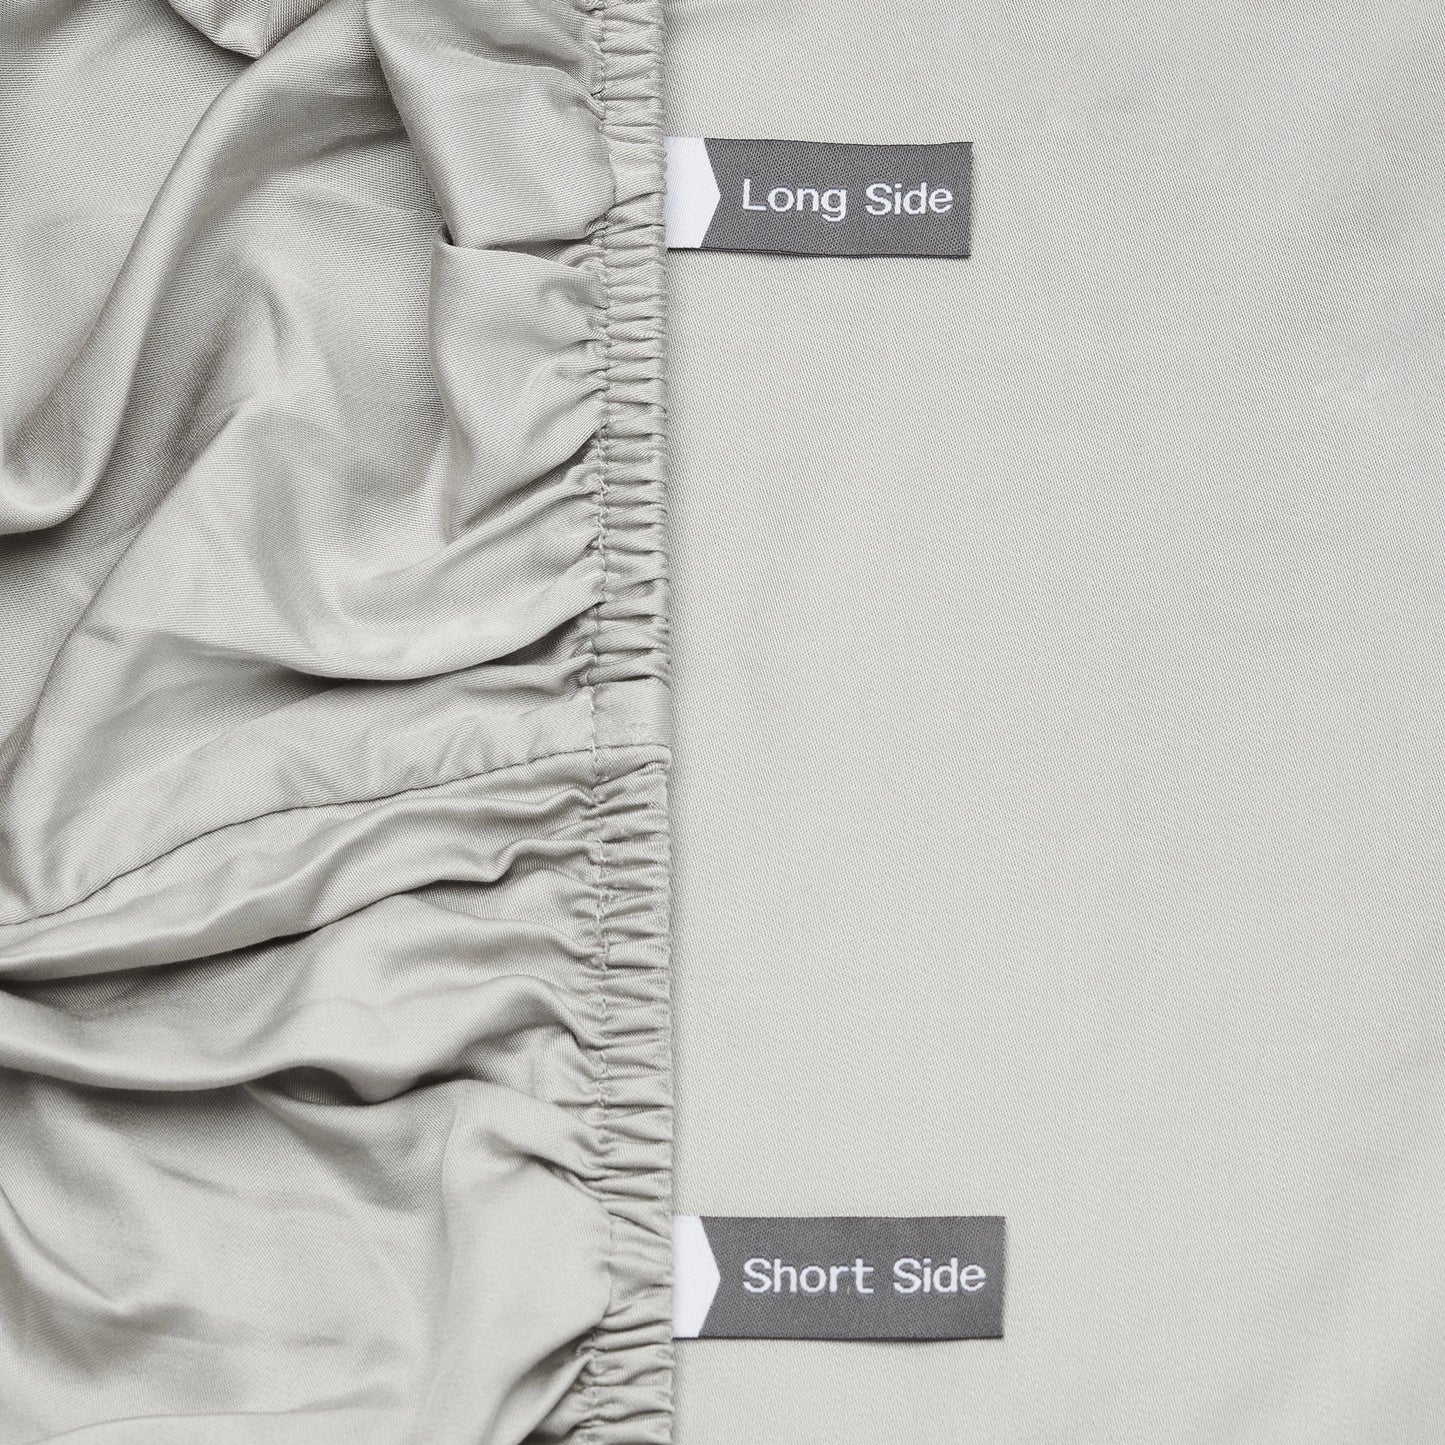 100% Organic Bamboo Silk Fitted Sheet - White, Super King Size